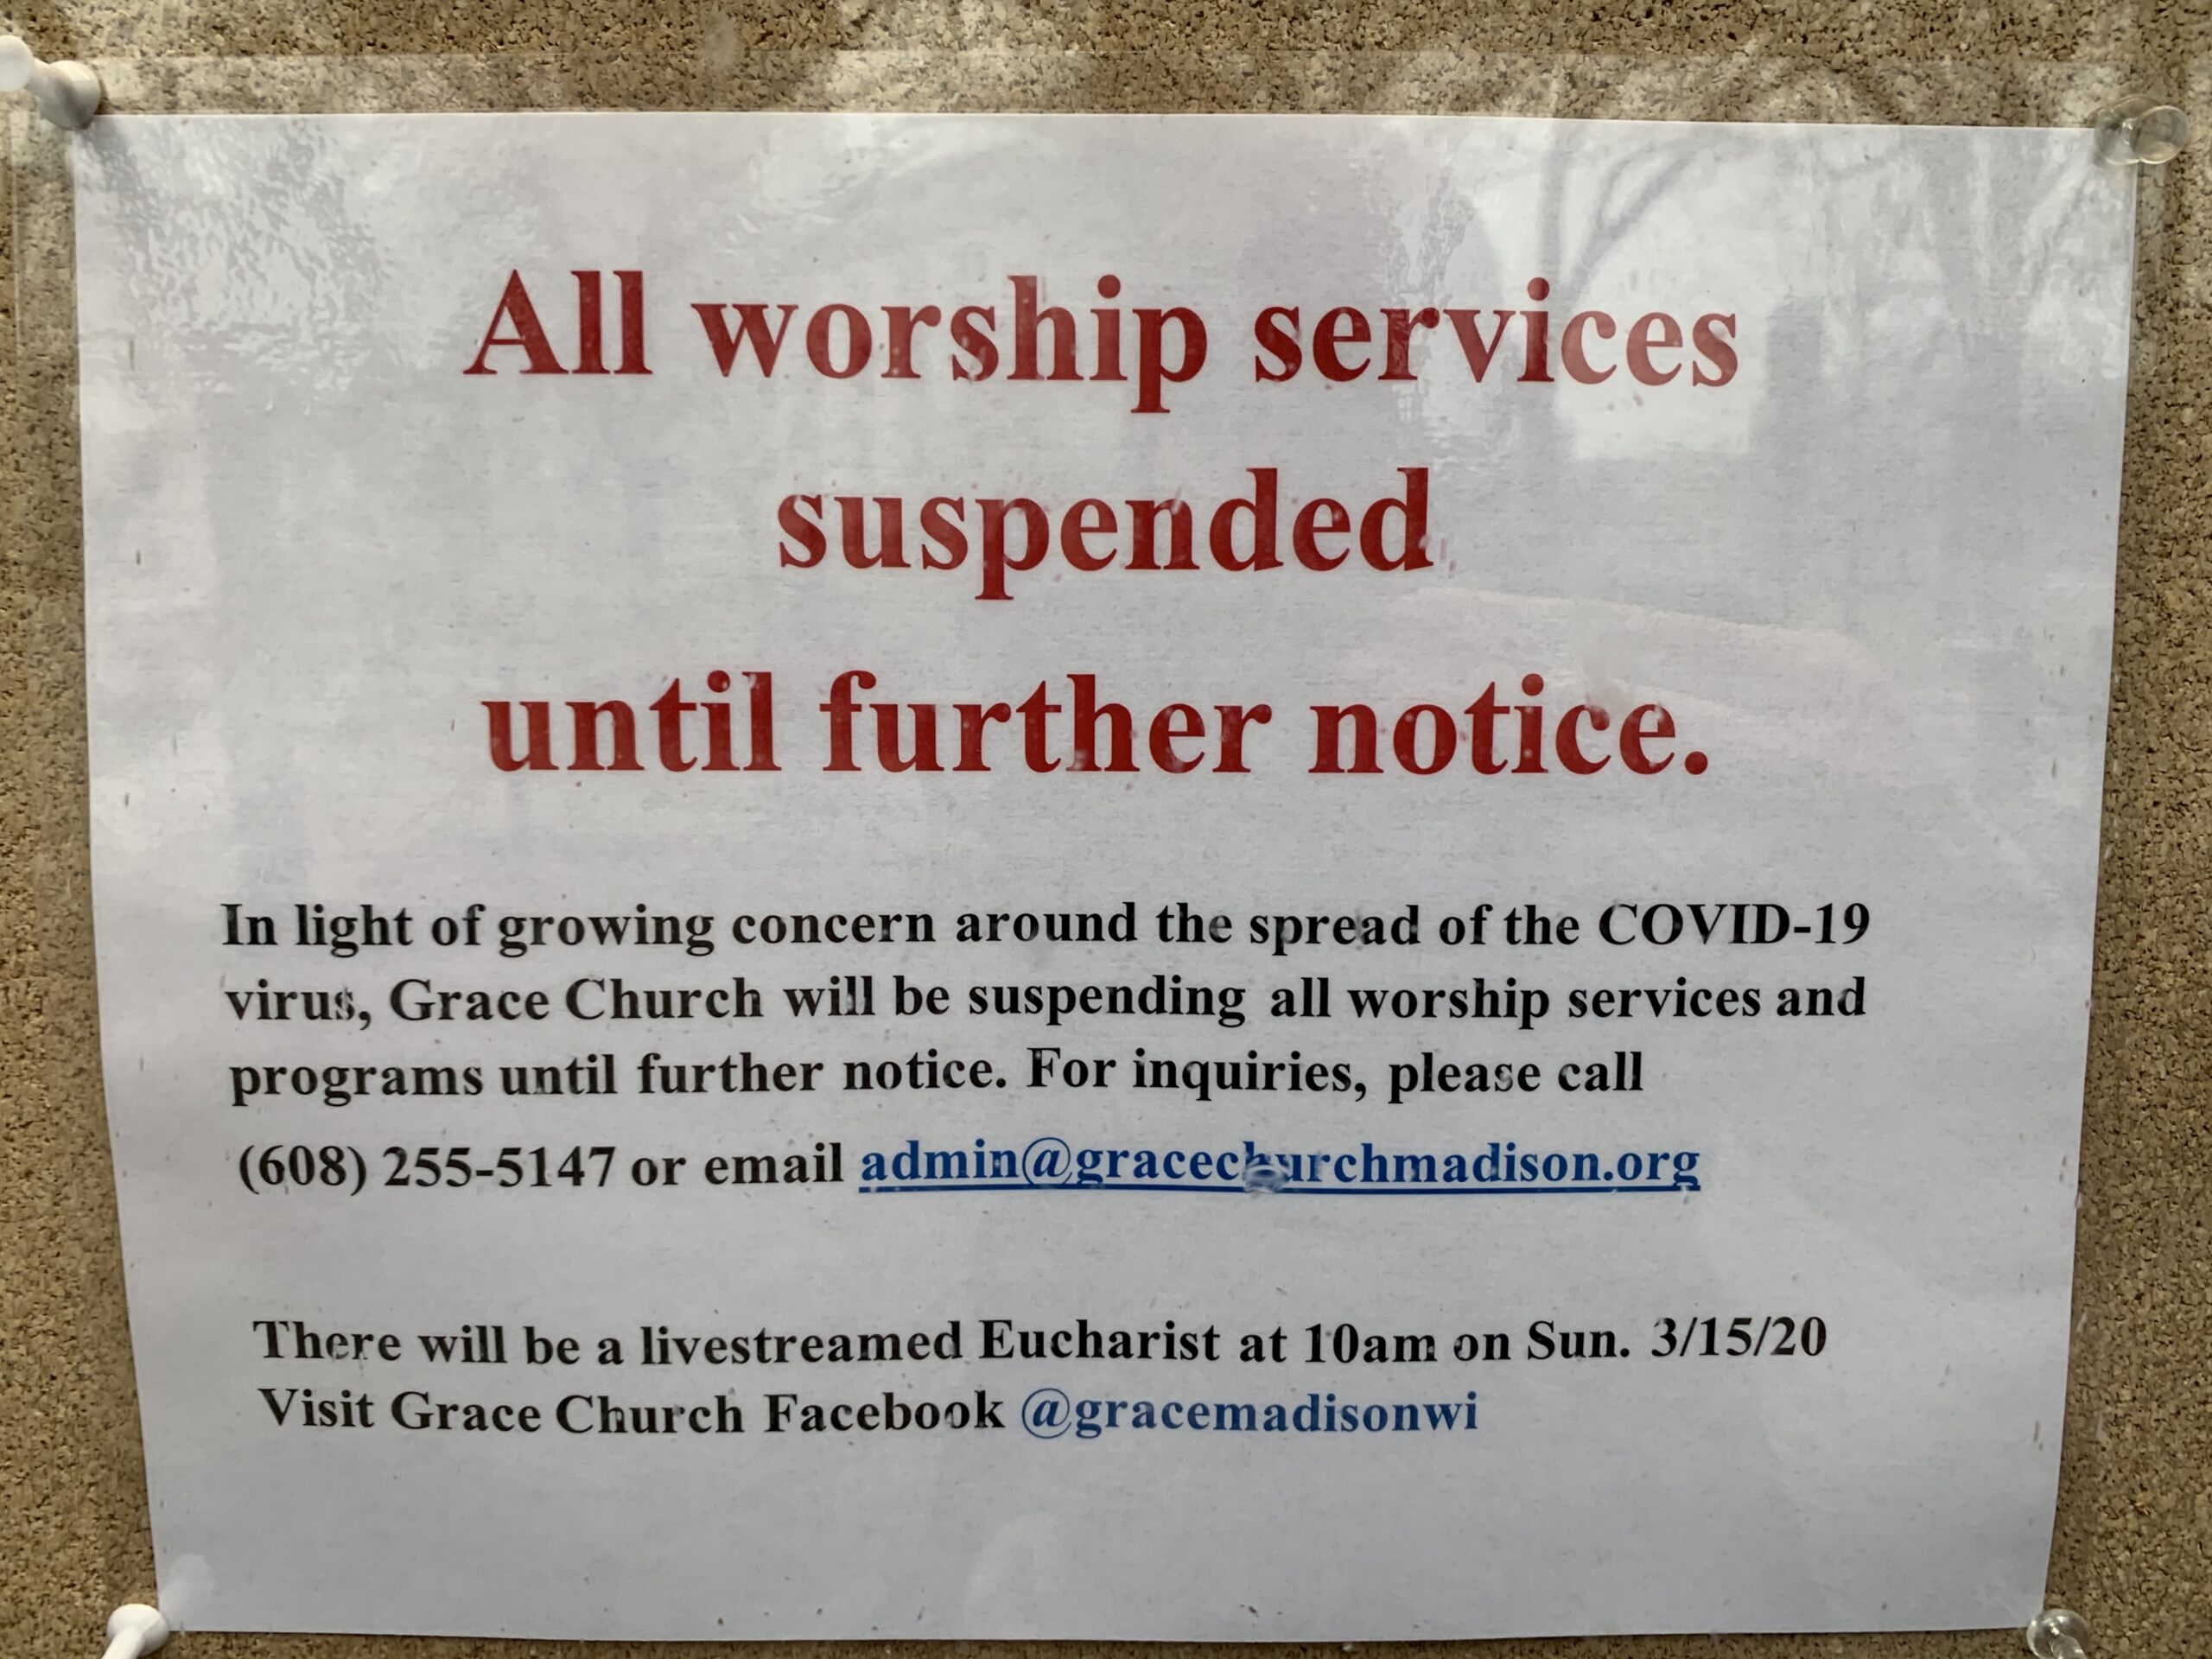 Grace Church in Madison has taken worship services online